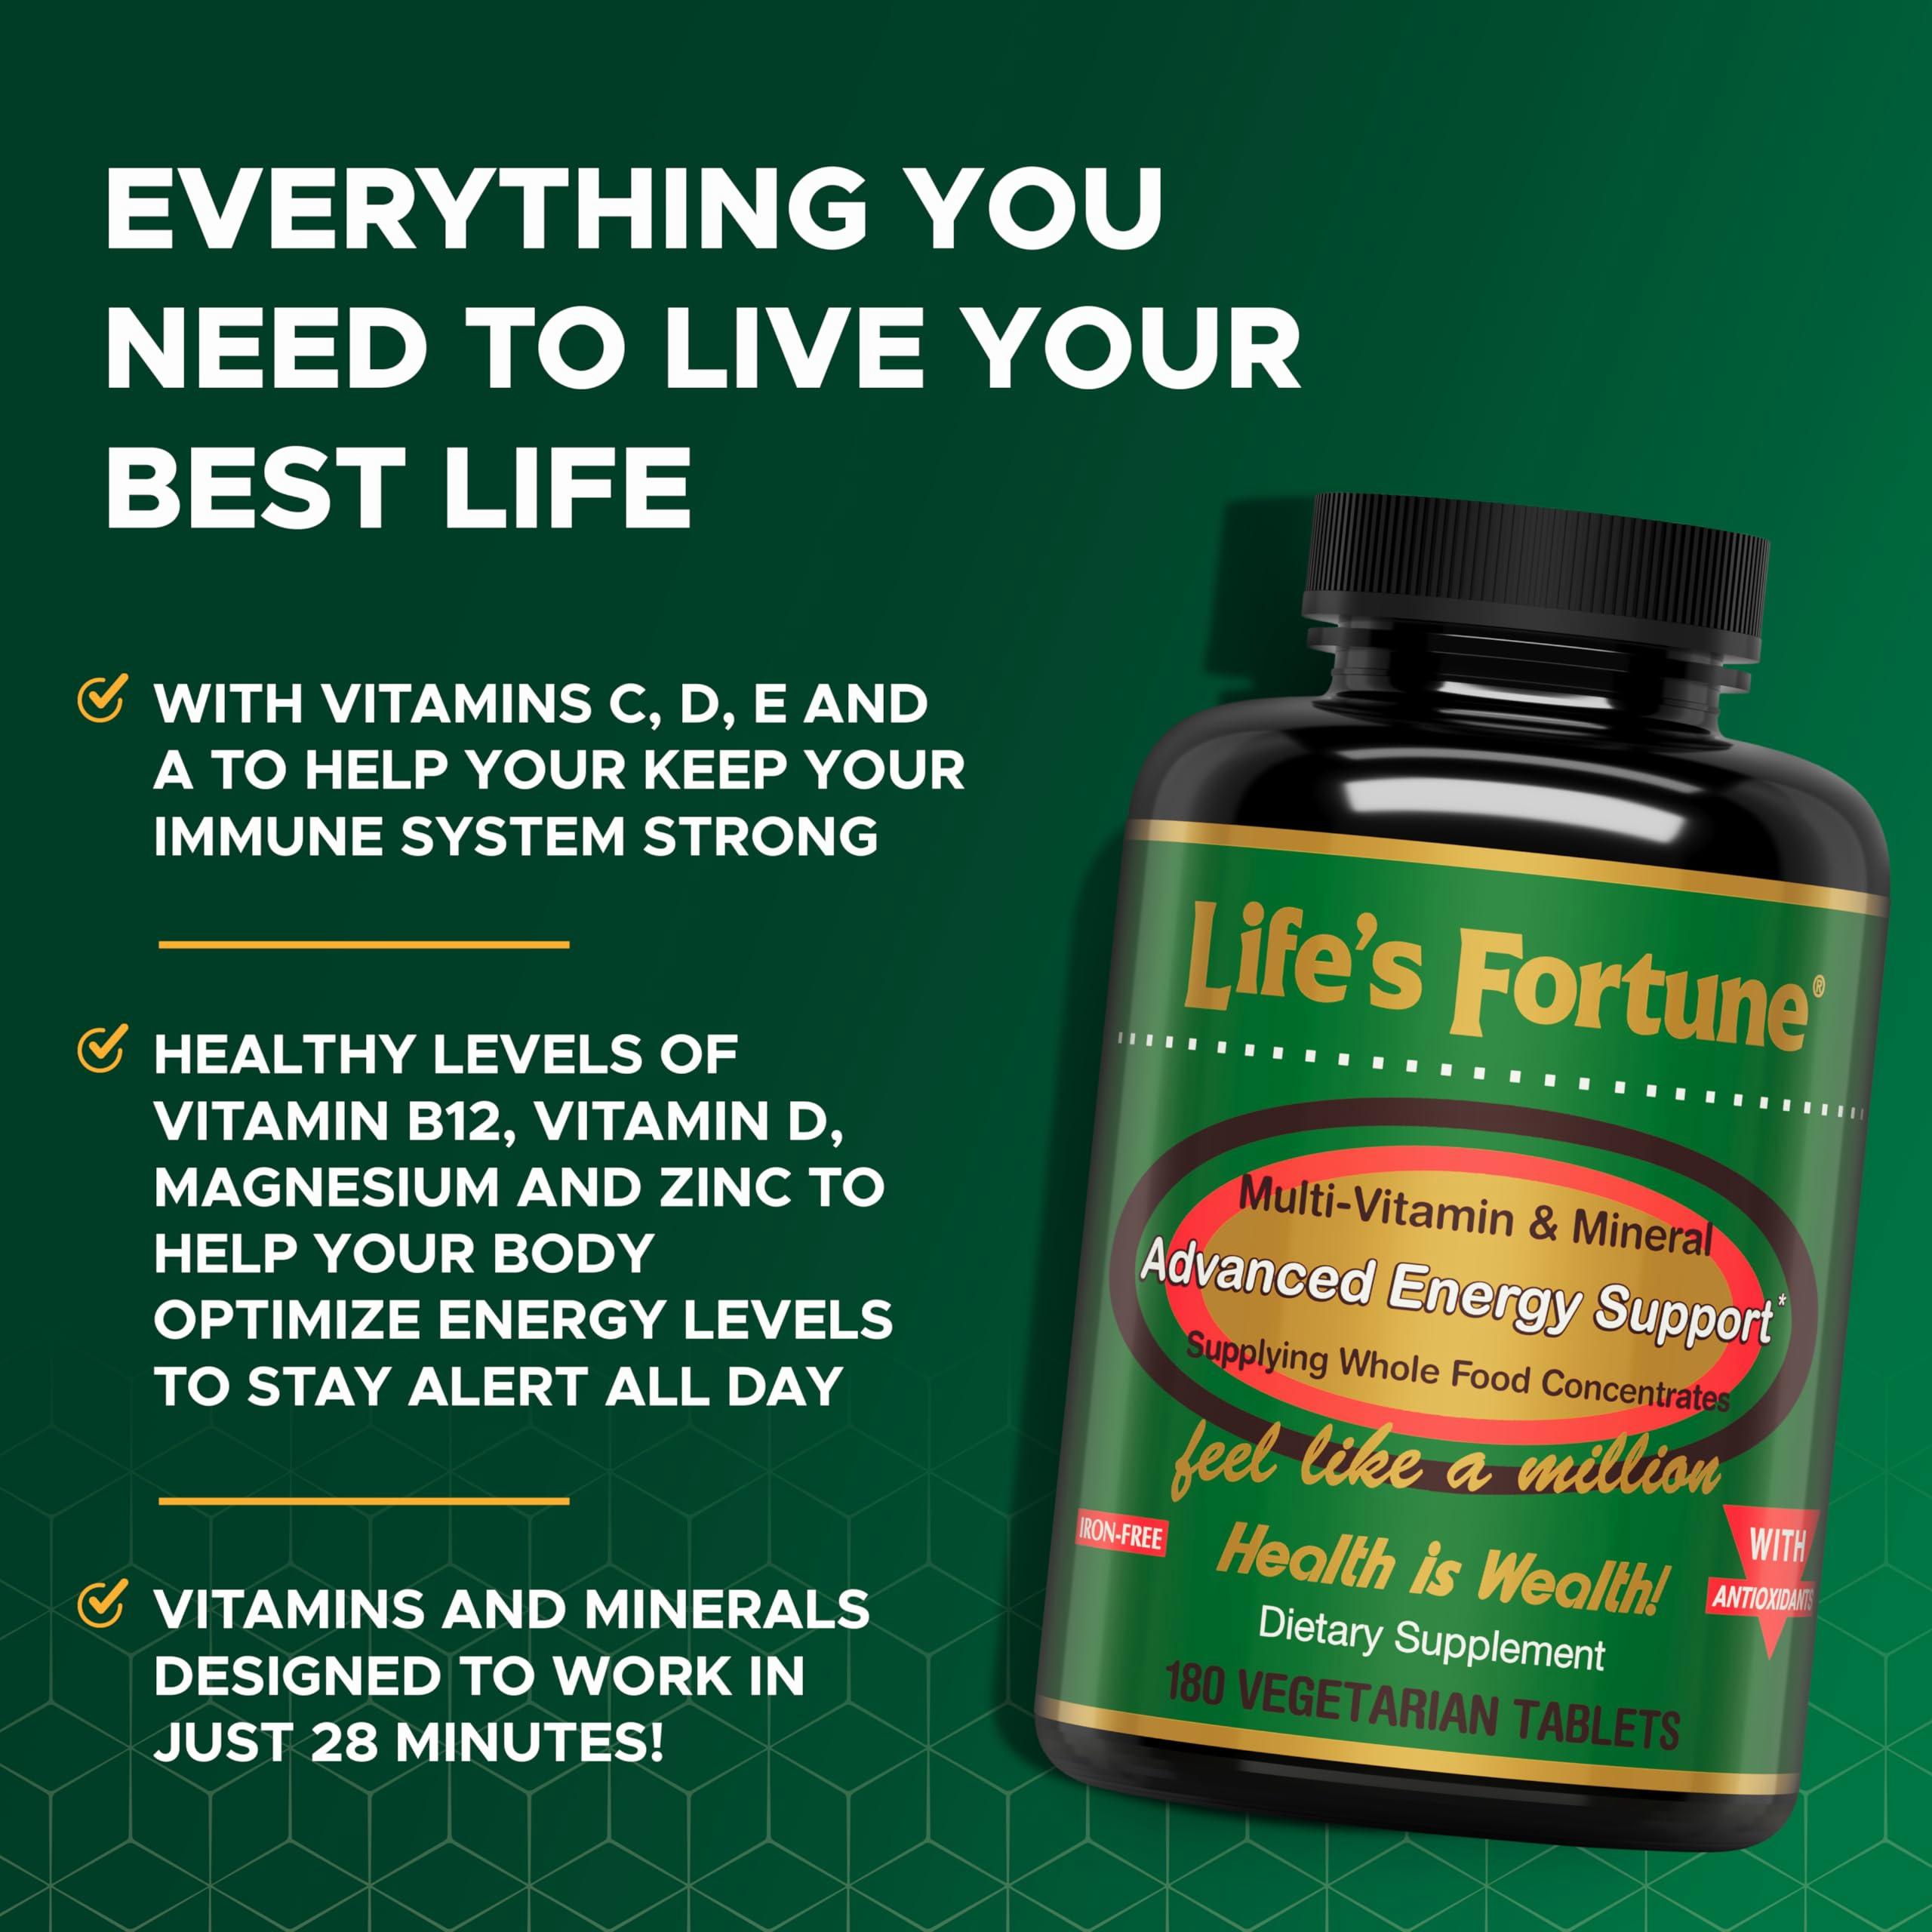 A bottle of Lifes Fortune multivitamins next to text claiming the vitamins will make you feel your best.